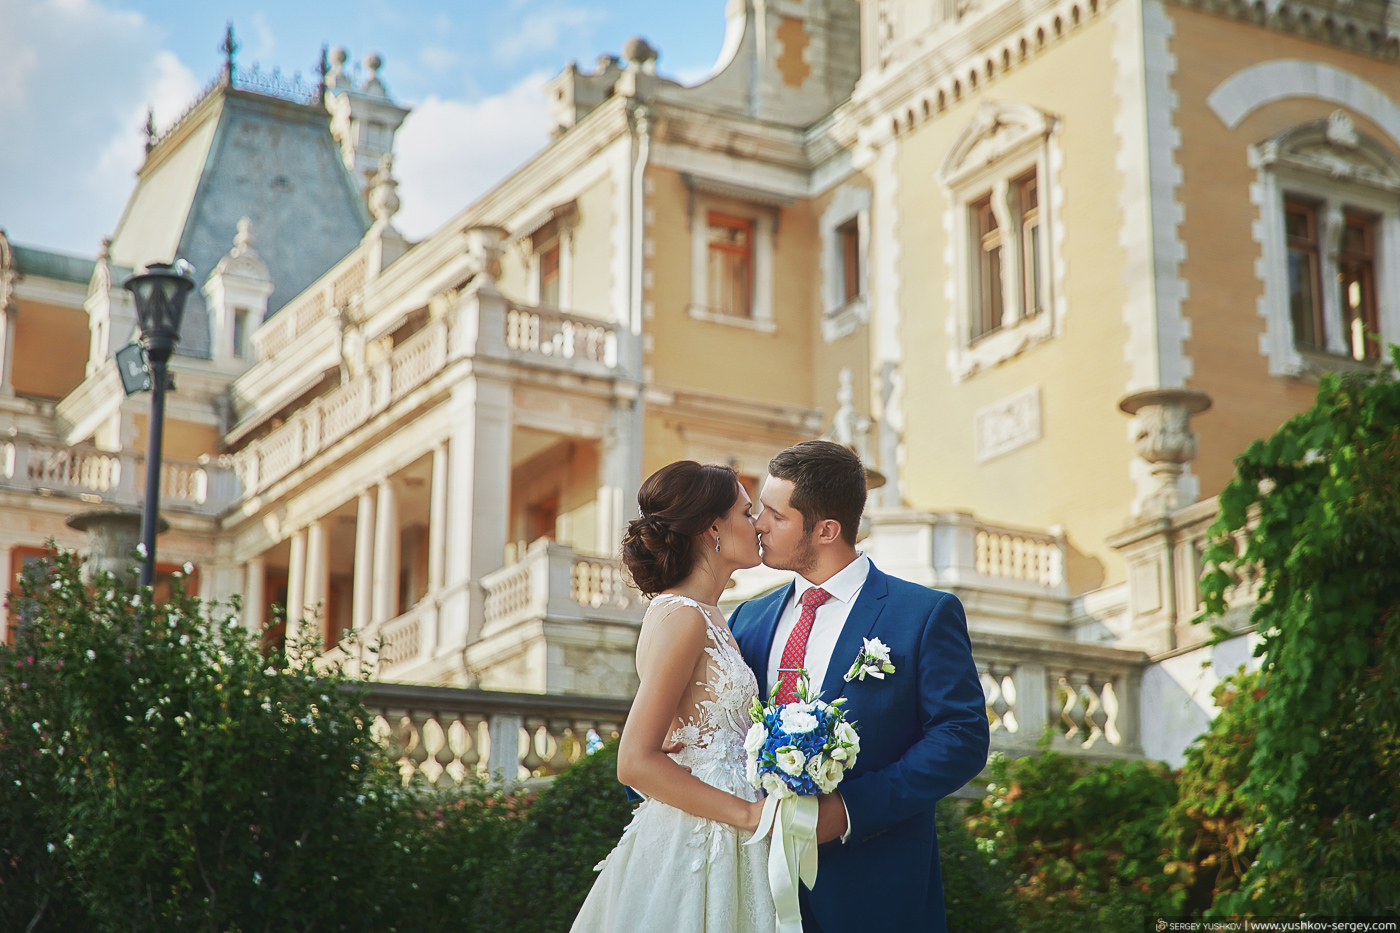 Wedding for two in the Crimea.